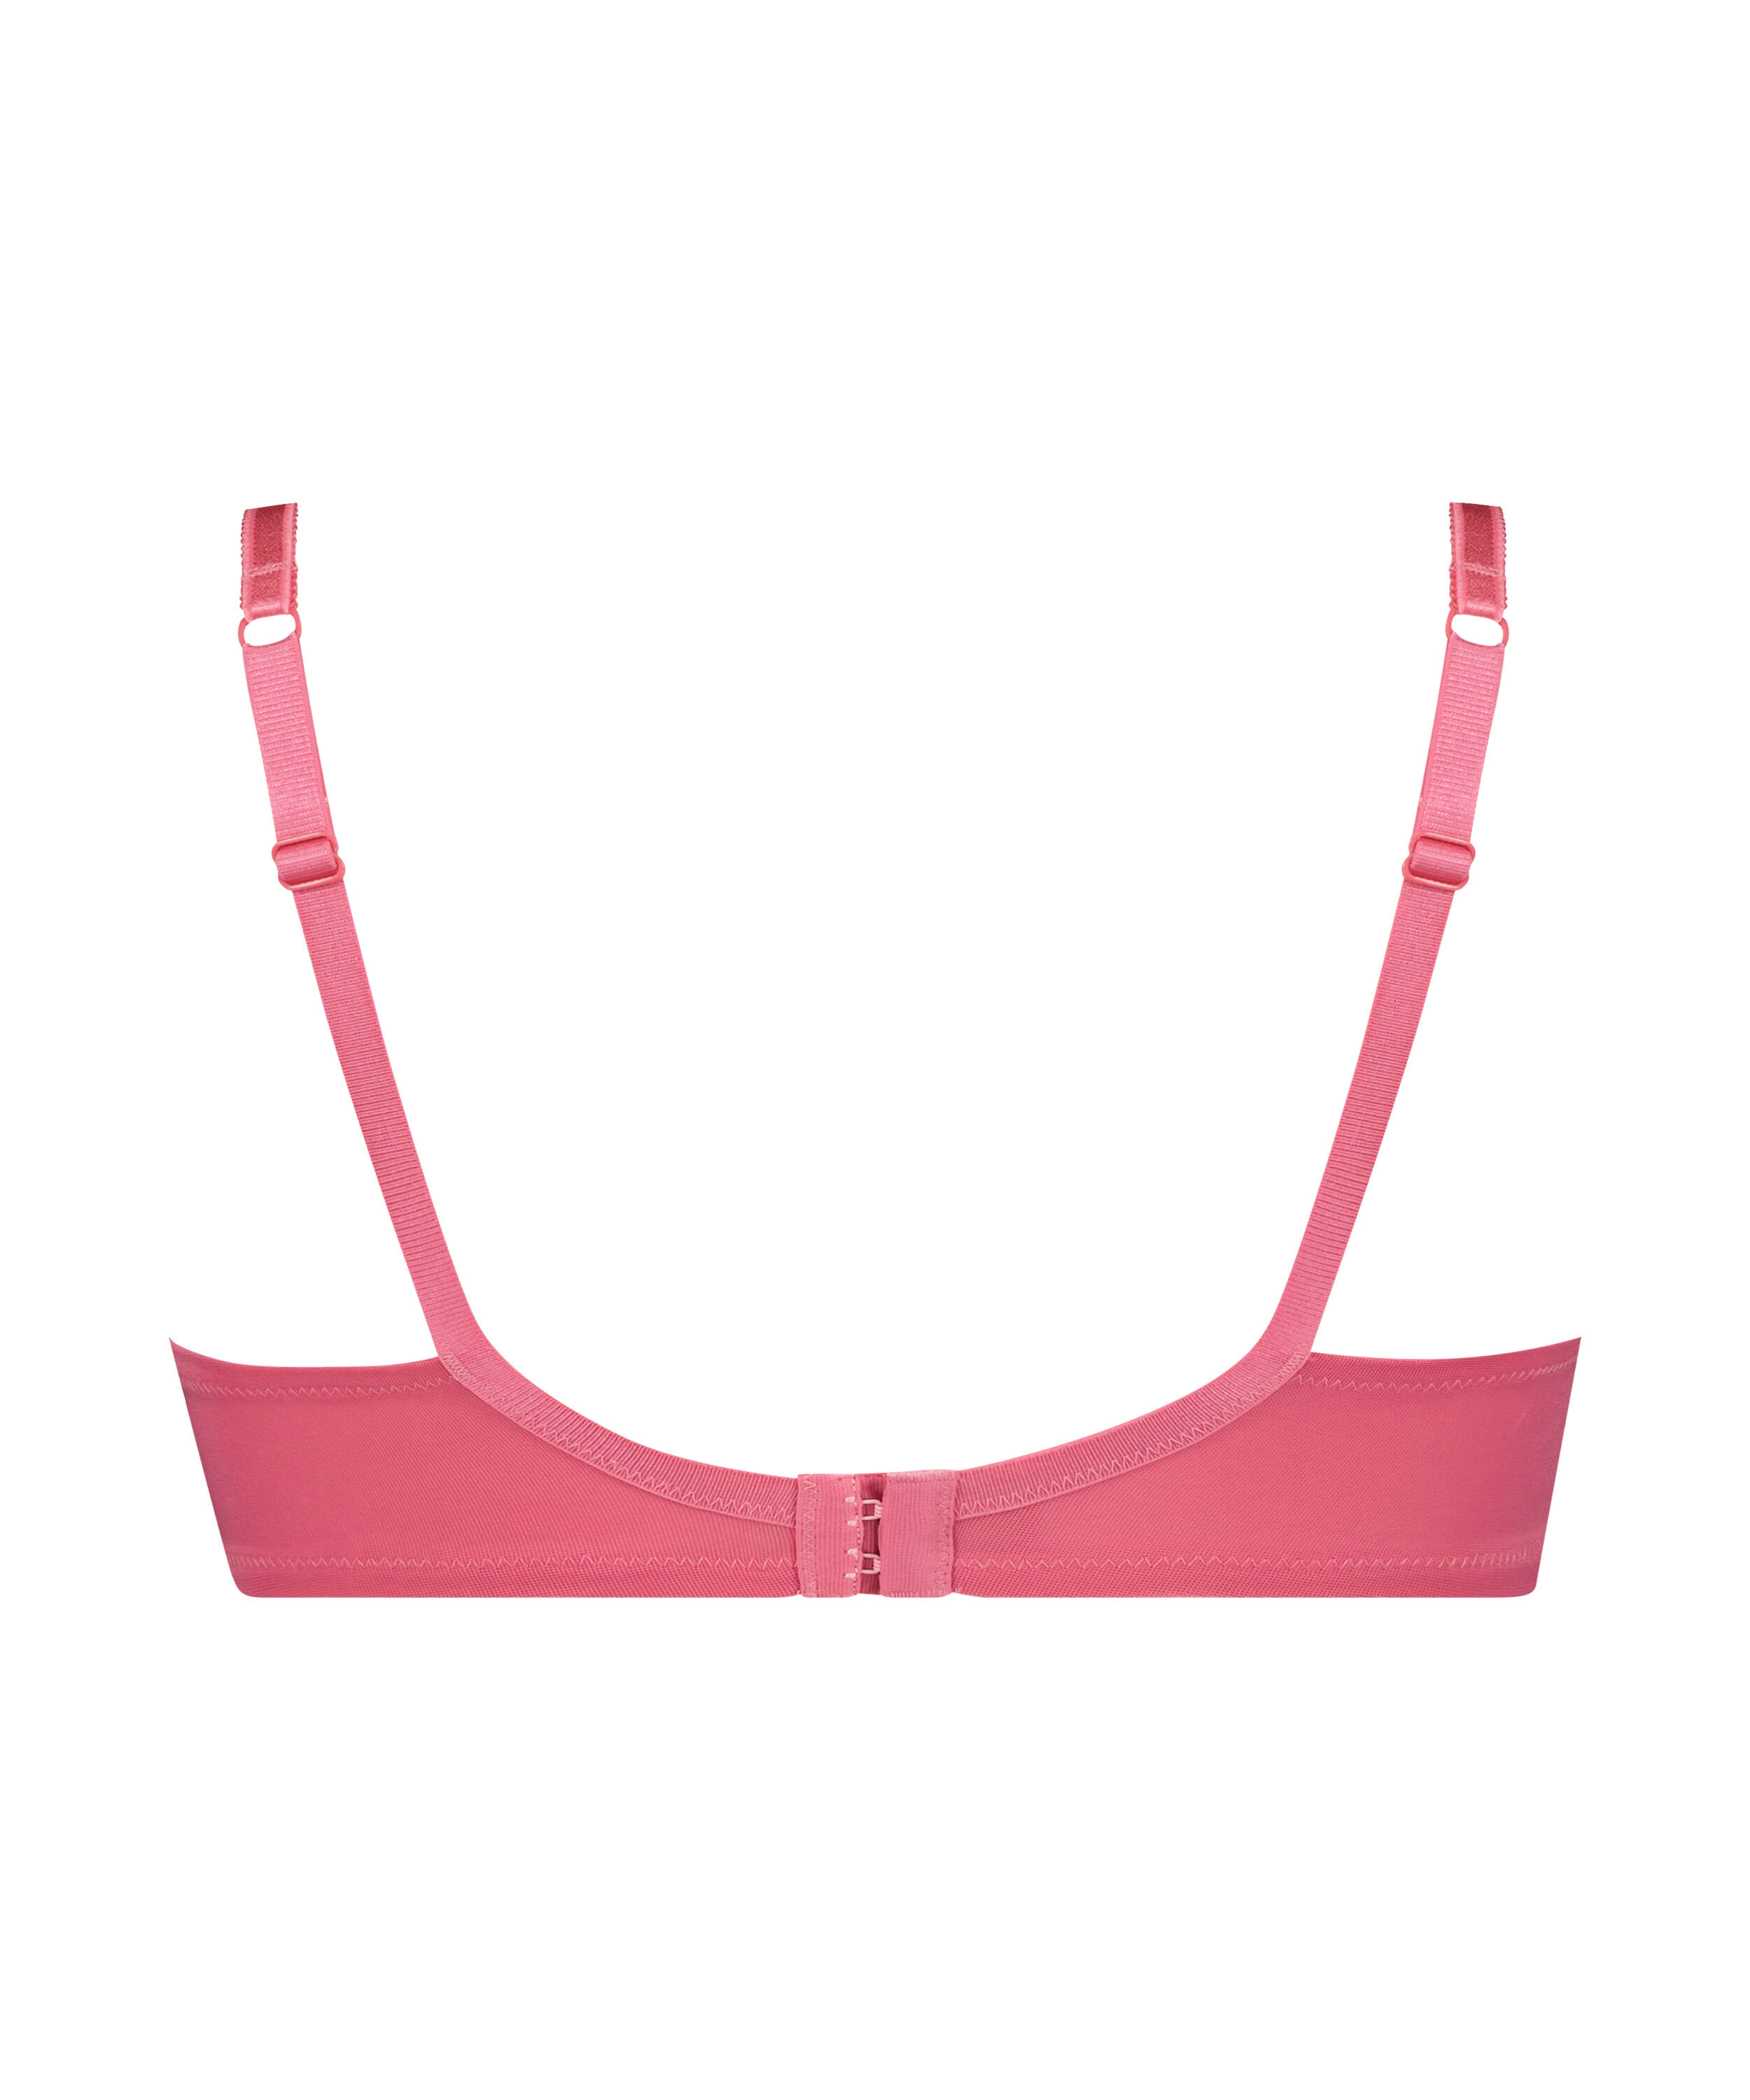 Sophie Non-Padded Underwired Bra, Pink, main